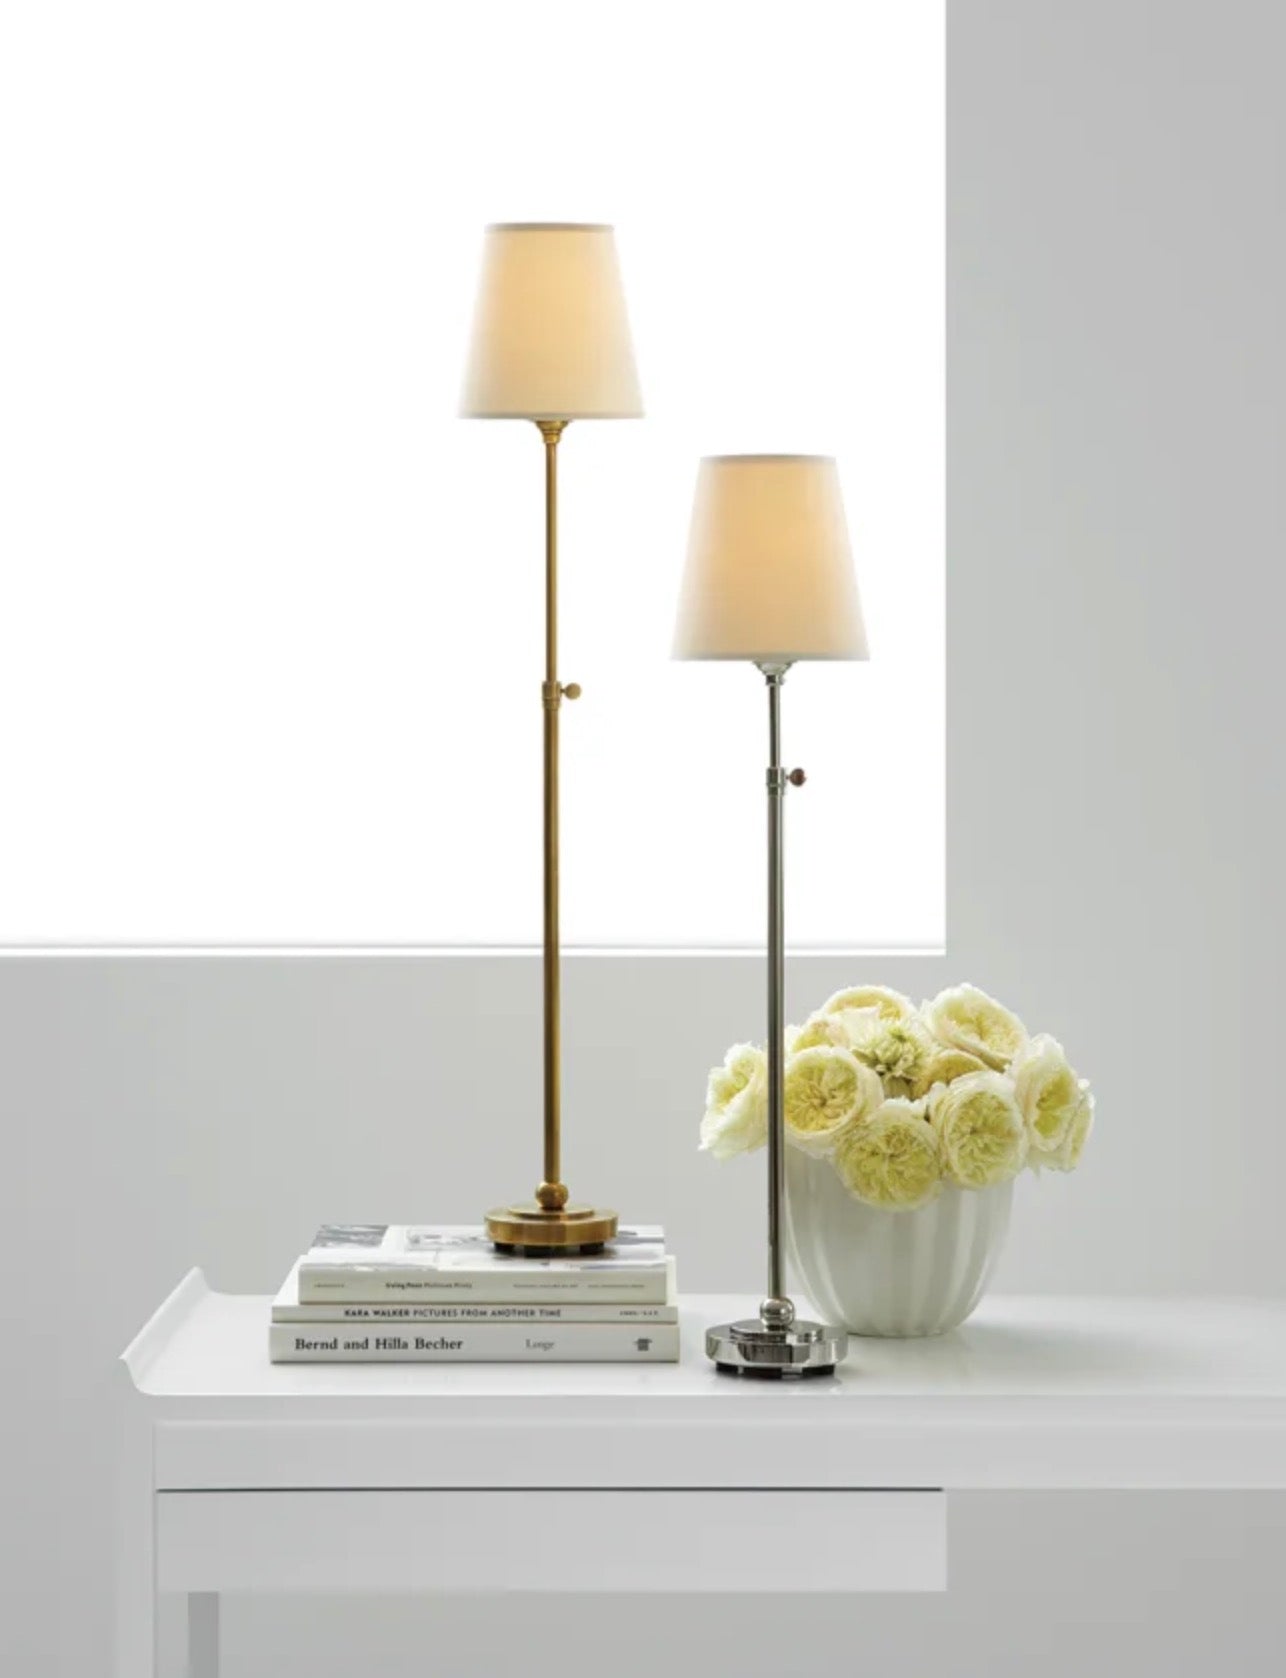 Bryant Table Lamp in Hand-Rubbed Antique Brass with Natural Paper Shade -  Designer's Studio